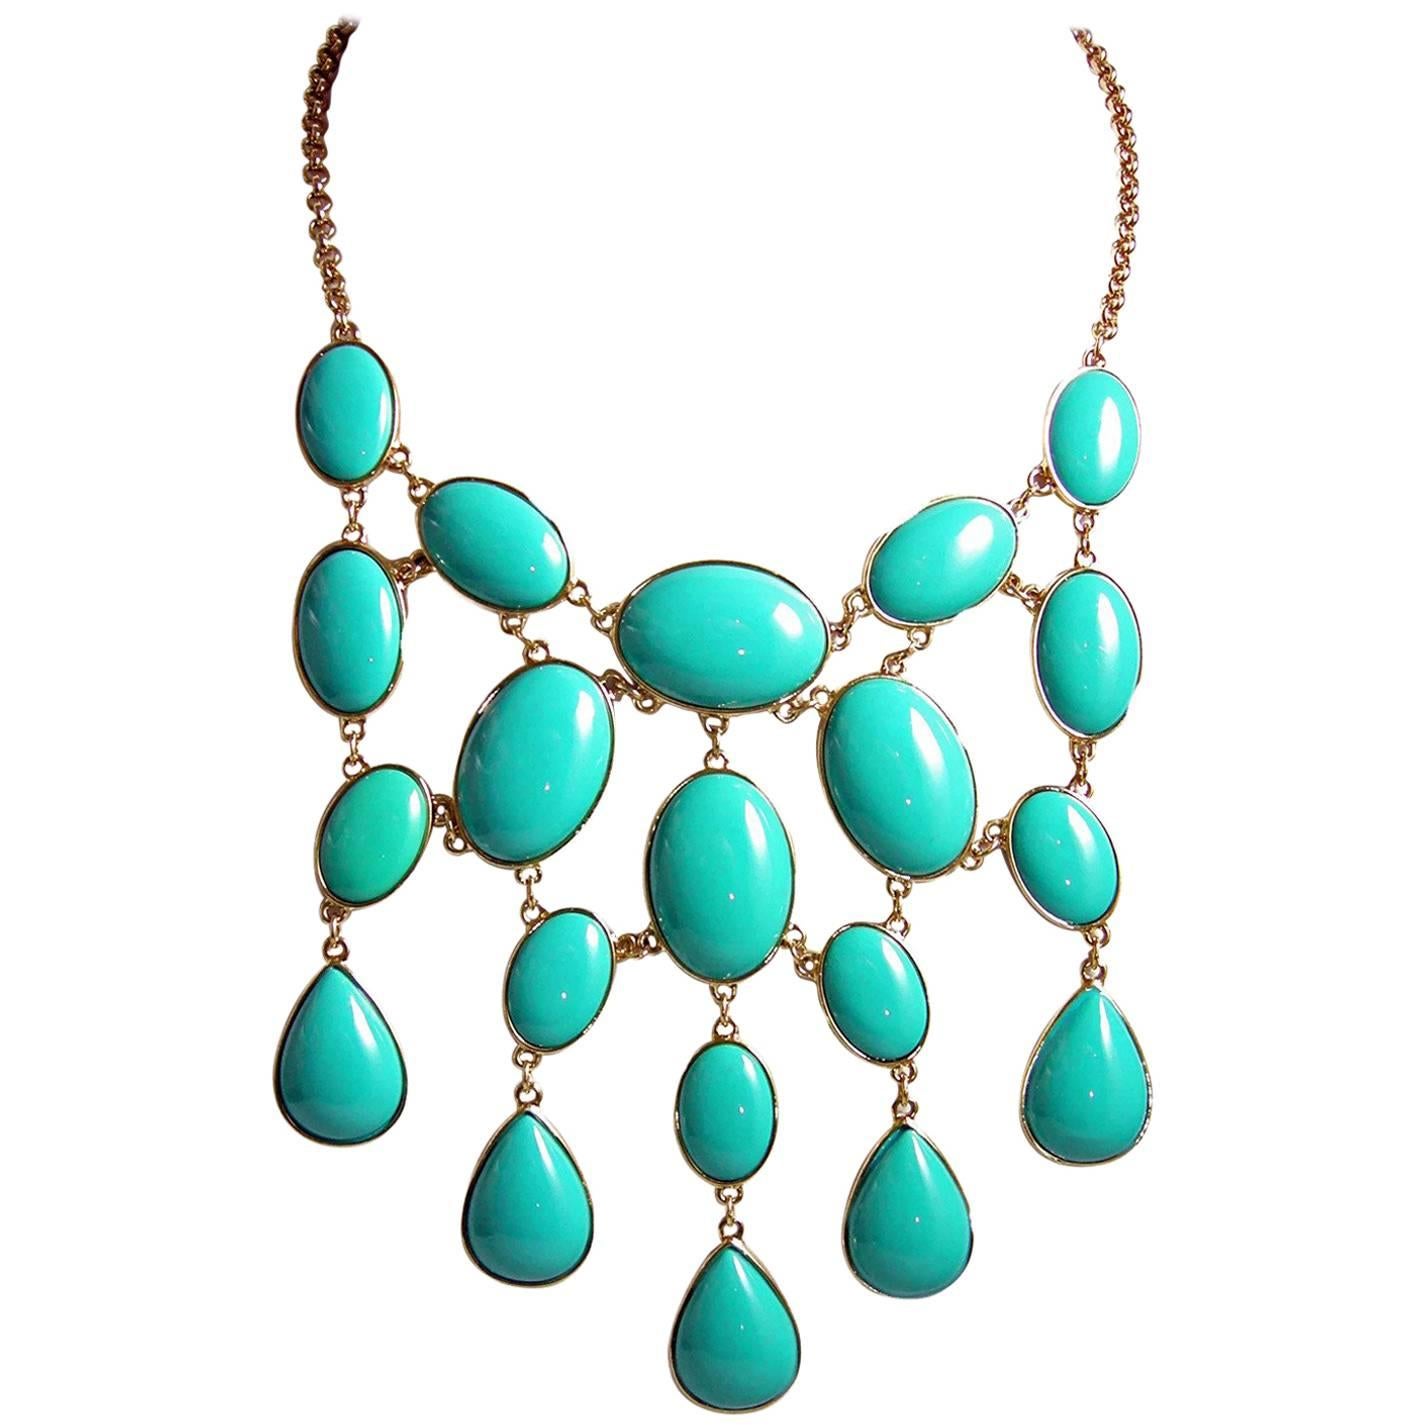 Kenneth Jay Lane Faux Turquoise Bib Necklace For Sale